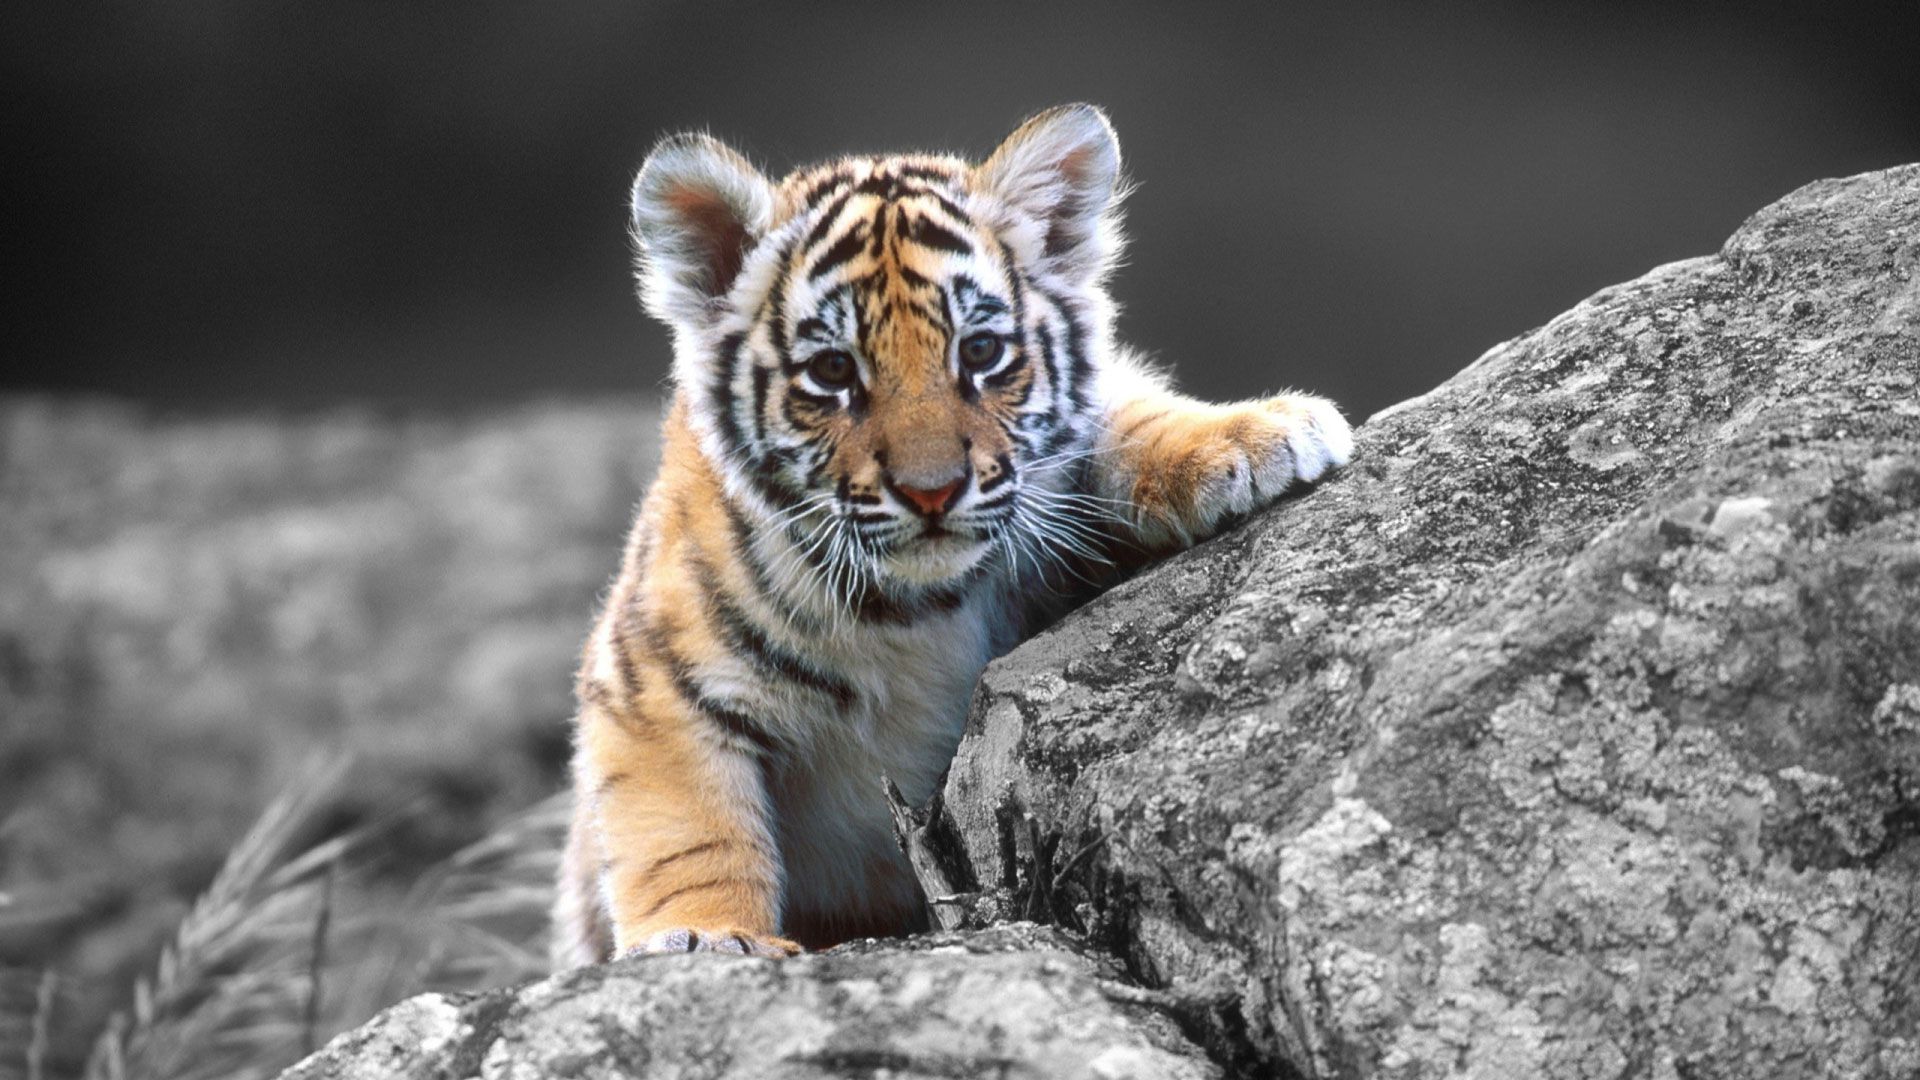 Tiger wallpapers in hd